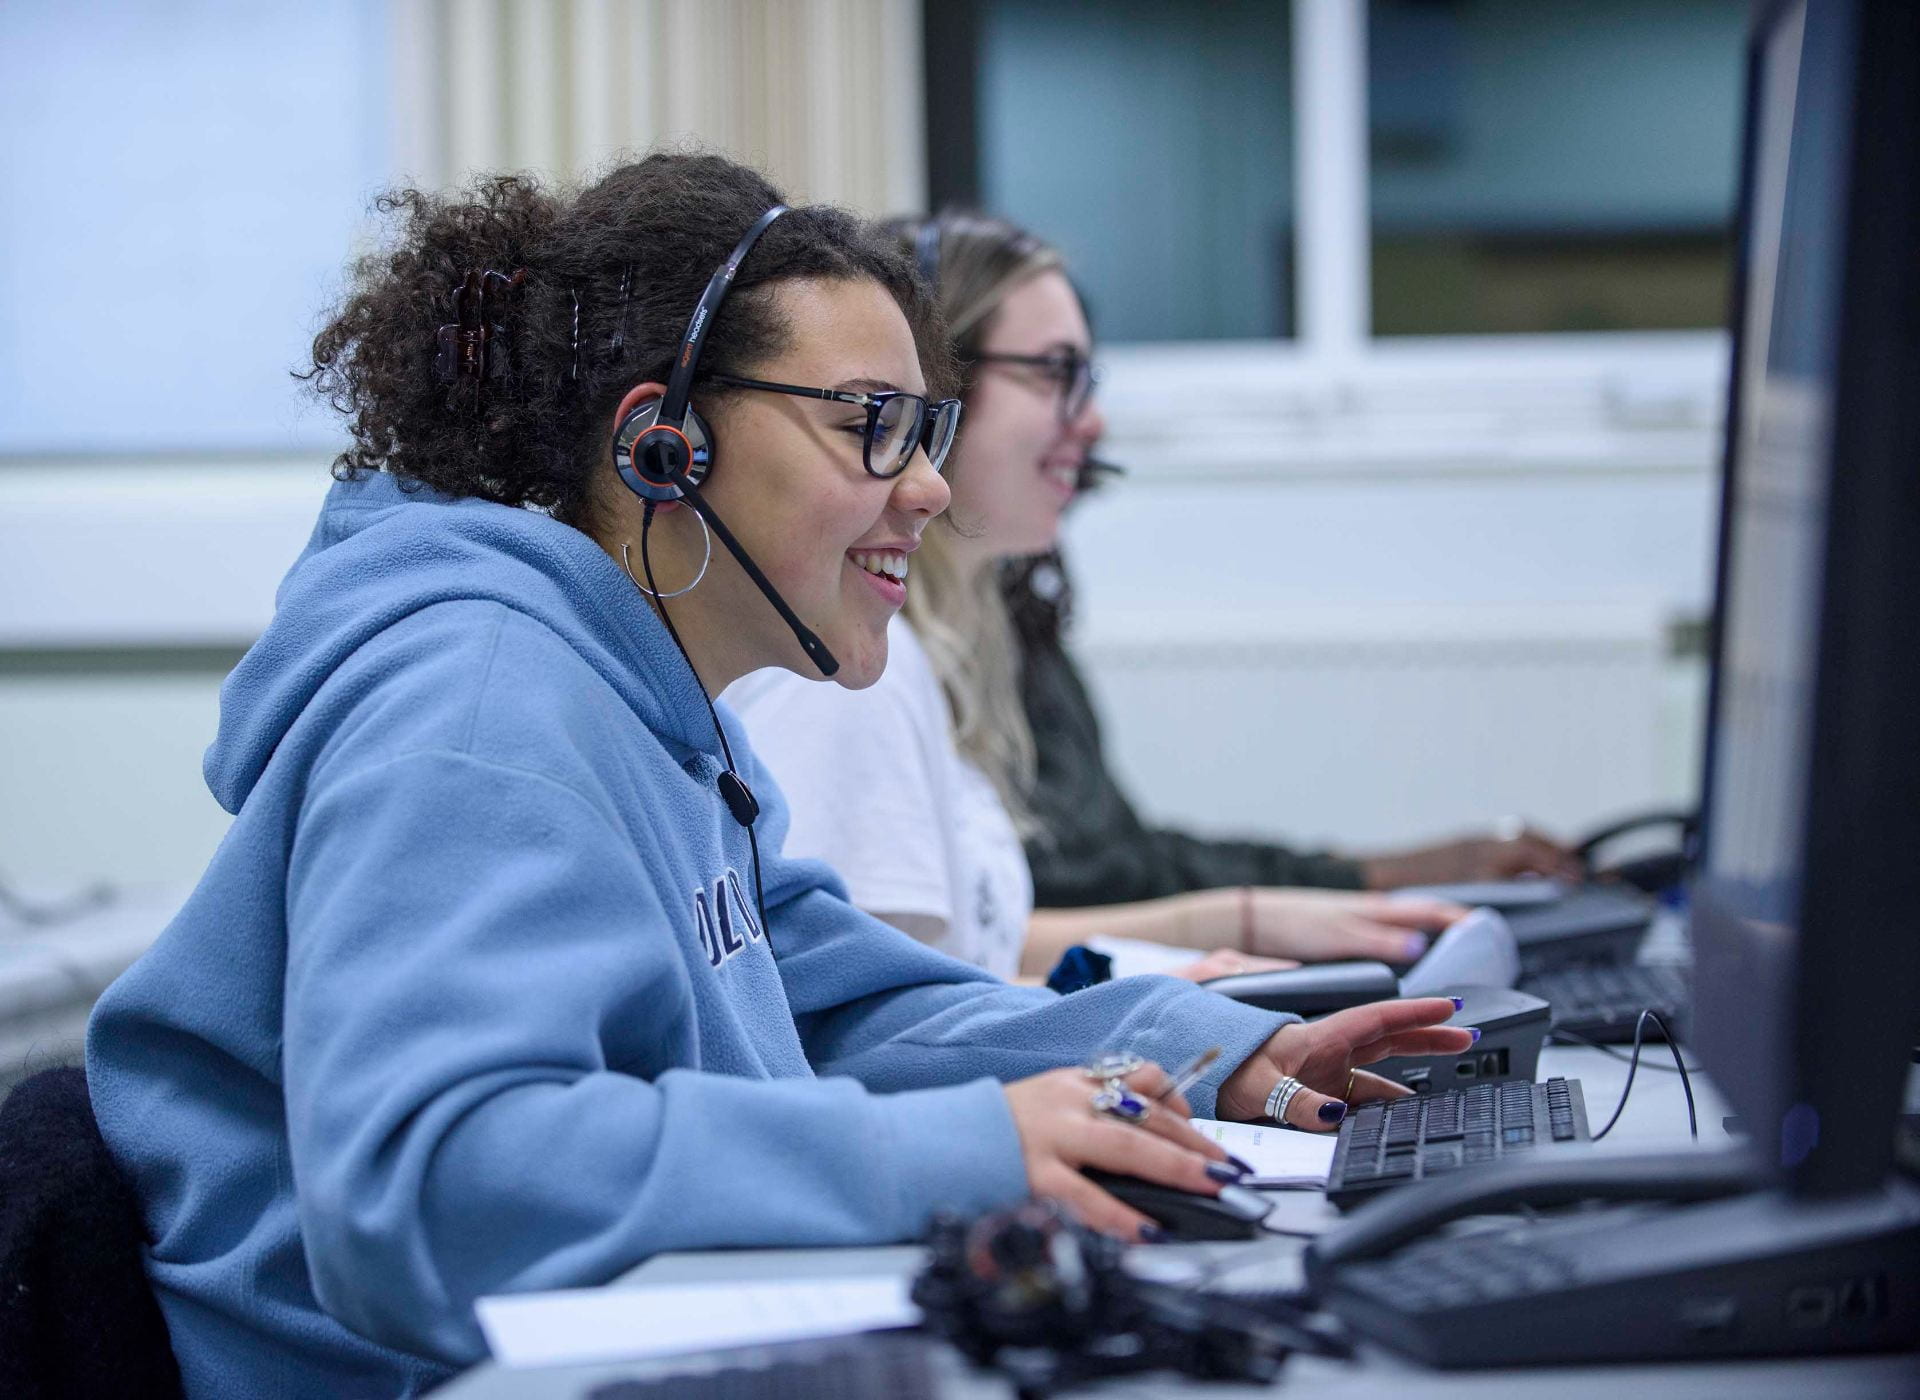 Two student callers wearing headsets smile and use a computer.